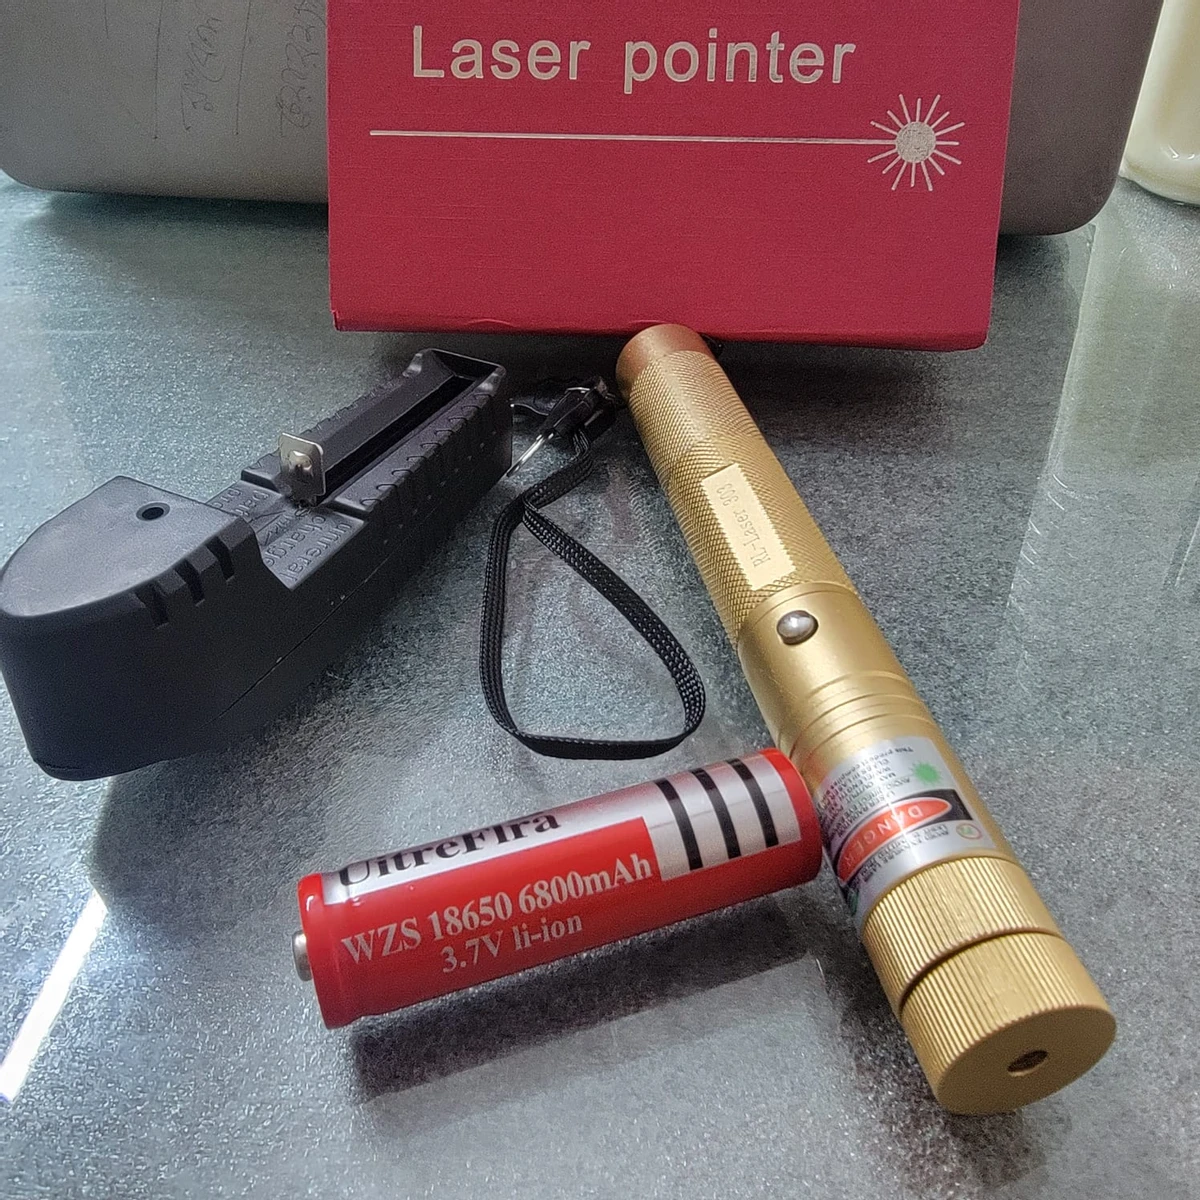 Rechargeable Laser Pointer ( 6800Mah ) 5 year warranty